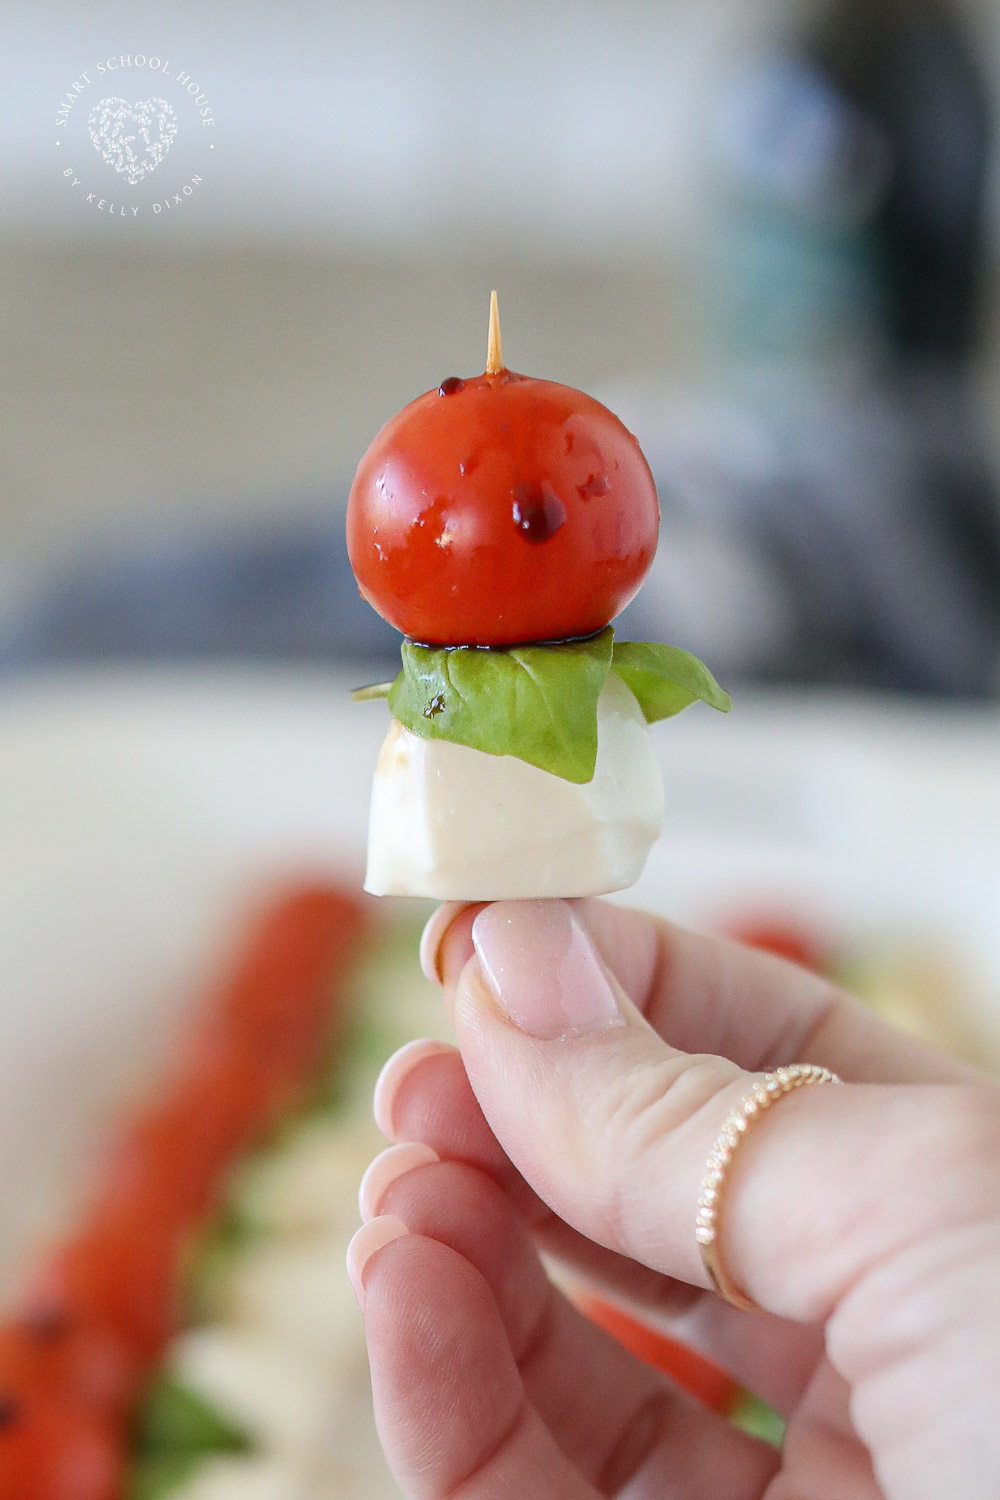 Caprese Salad Skewers are a beautiful and easy appetizer idea! Sweet cherry tomatoes on top of basil and a cute little ball of mozzarella.